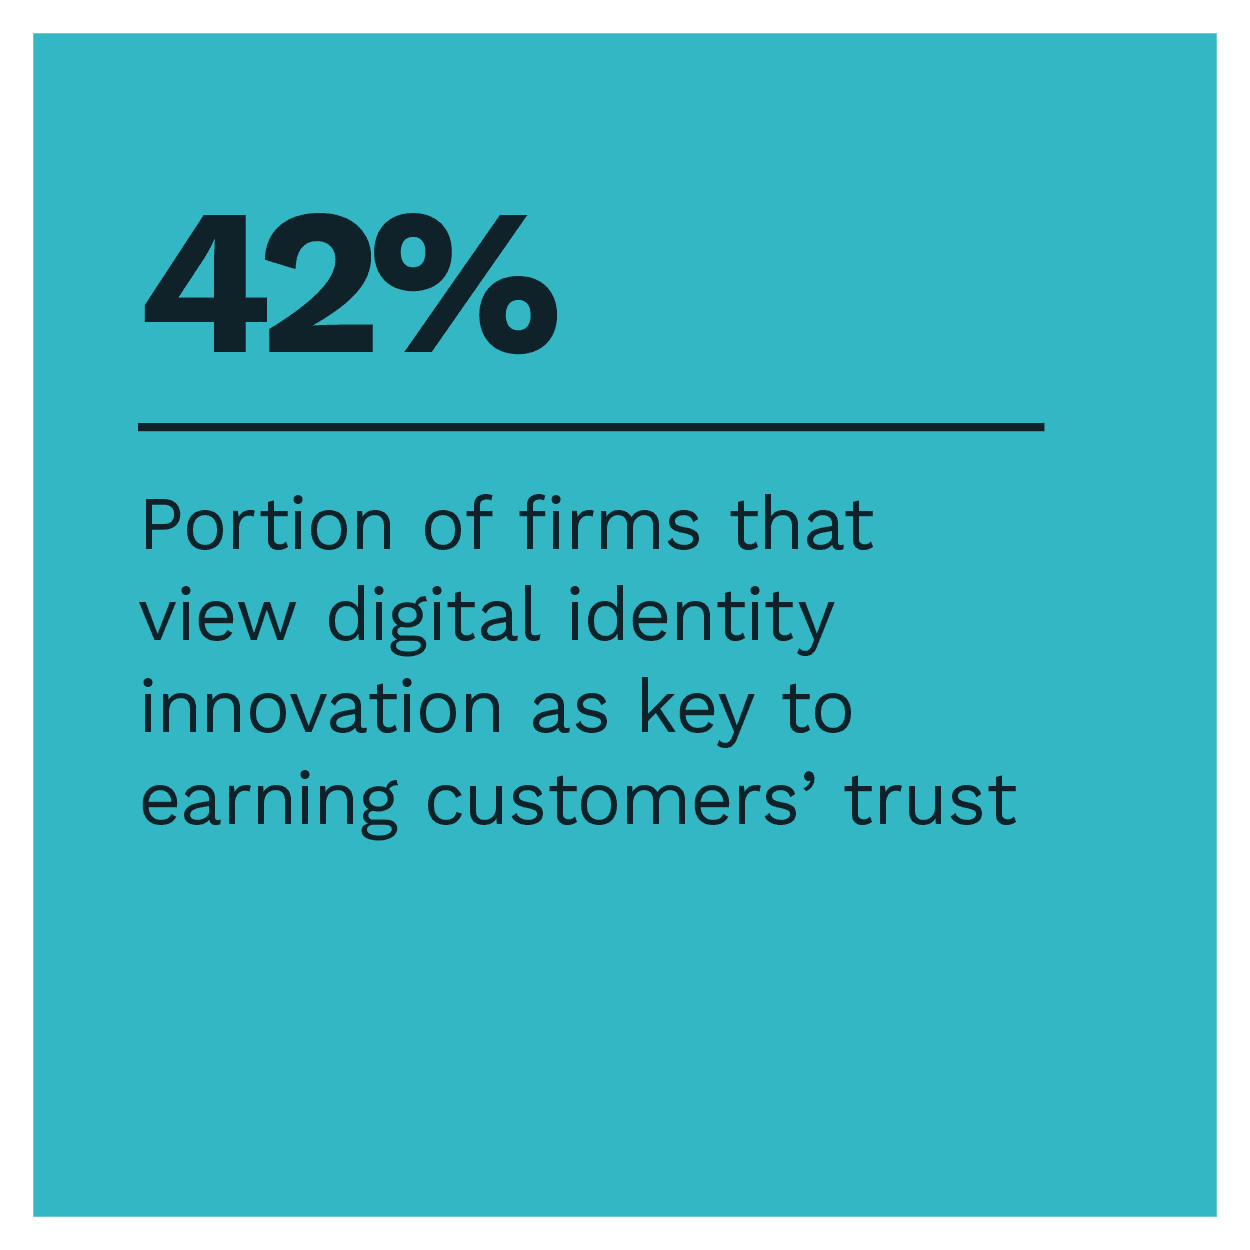 Portion of firms that view digital identity innovation as key to earning customers' trust